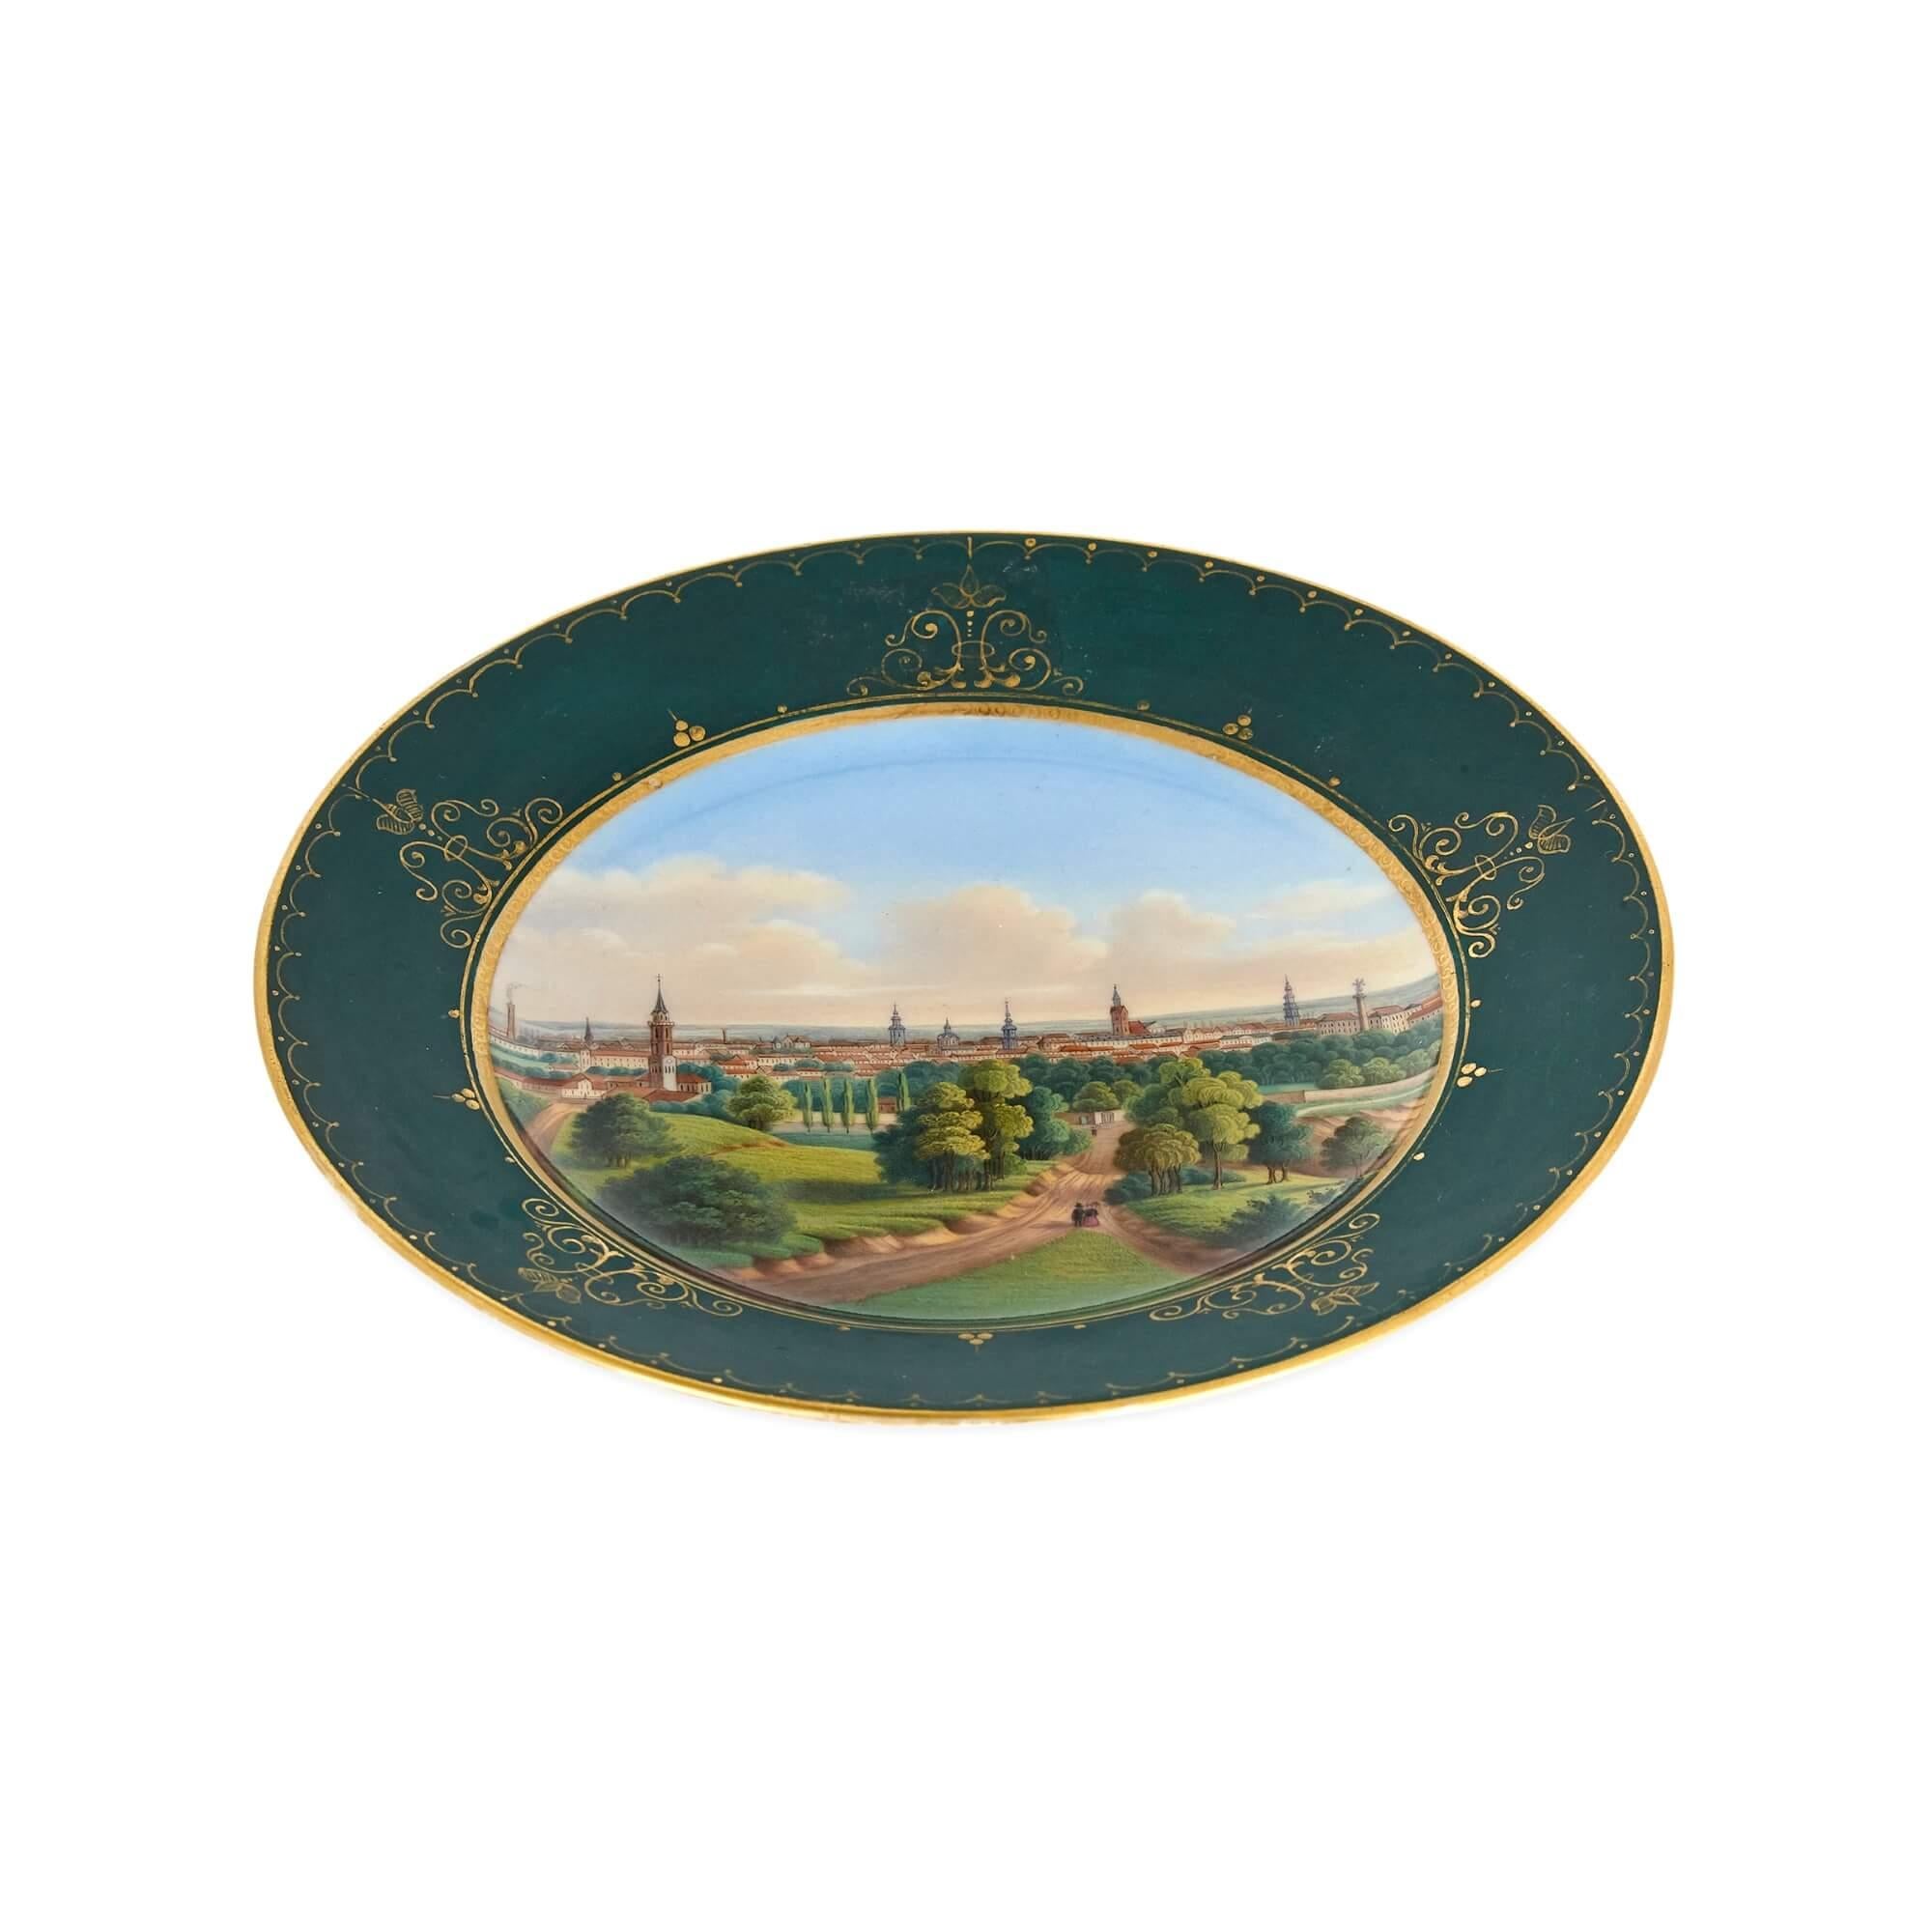 Russian 19th Century porcelain plate with painted landscape of Riga
Russian, c. 1820
Height 2.5cm, diameter 17cm

This antique Russian porcelain plate features a wide border in a green ground, decorated with arabesque details in gilt. To the centre,